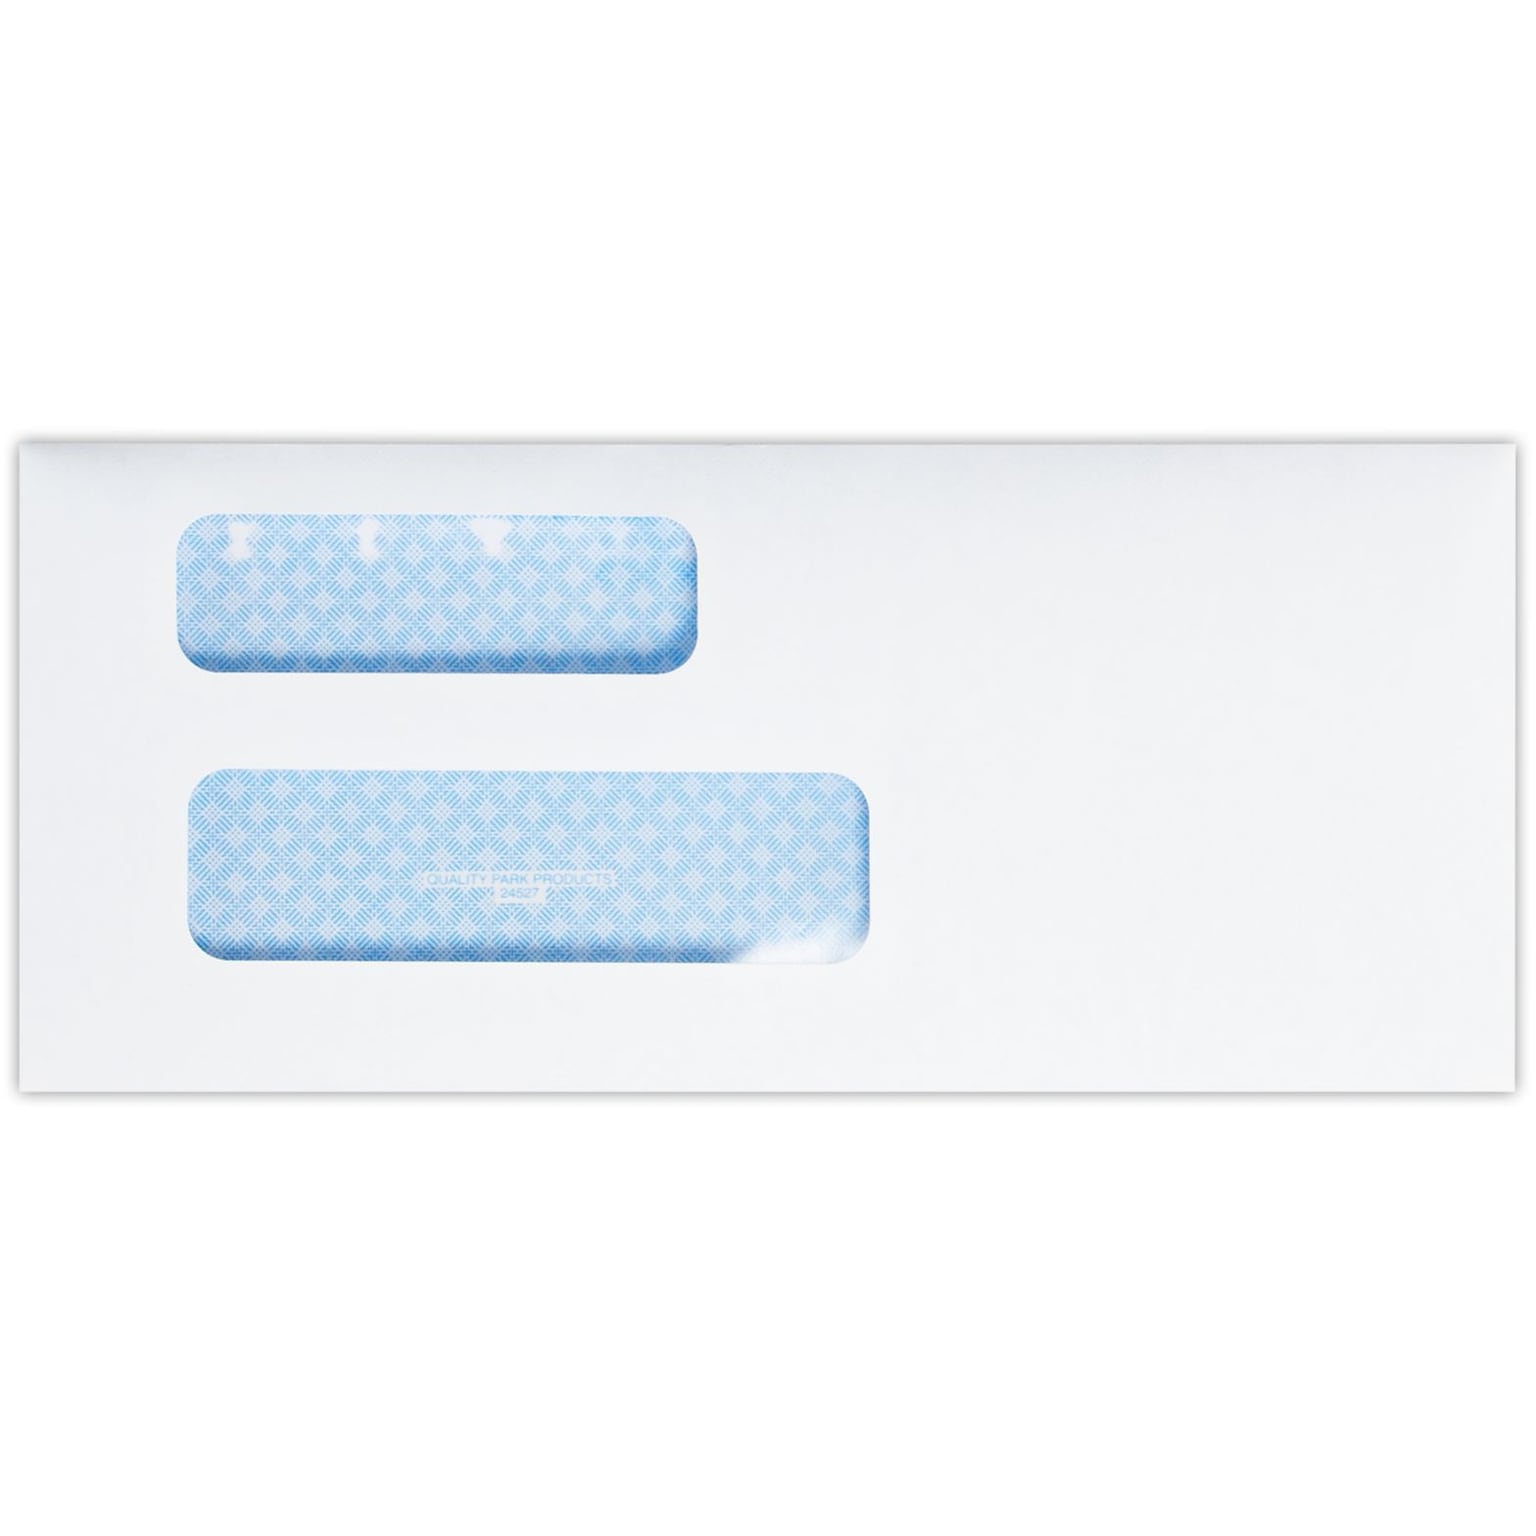 Quality Park Moistenable Glue Security Tinted #9 Double Window Envelope, 3 7/8 x 8 7/8, Bright White, 500/Pack (9DW-W-500)